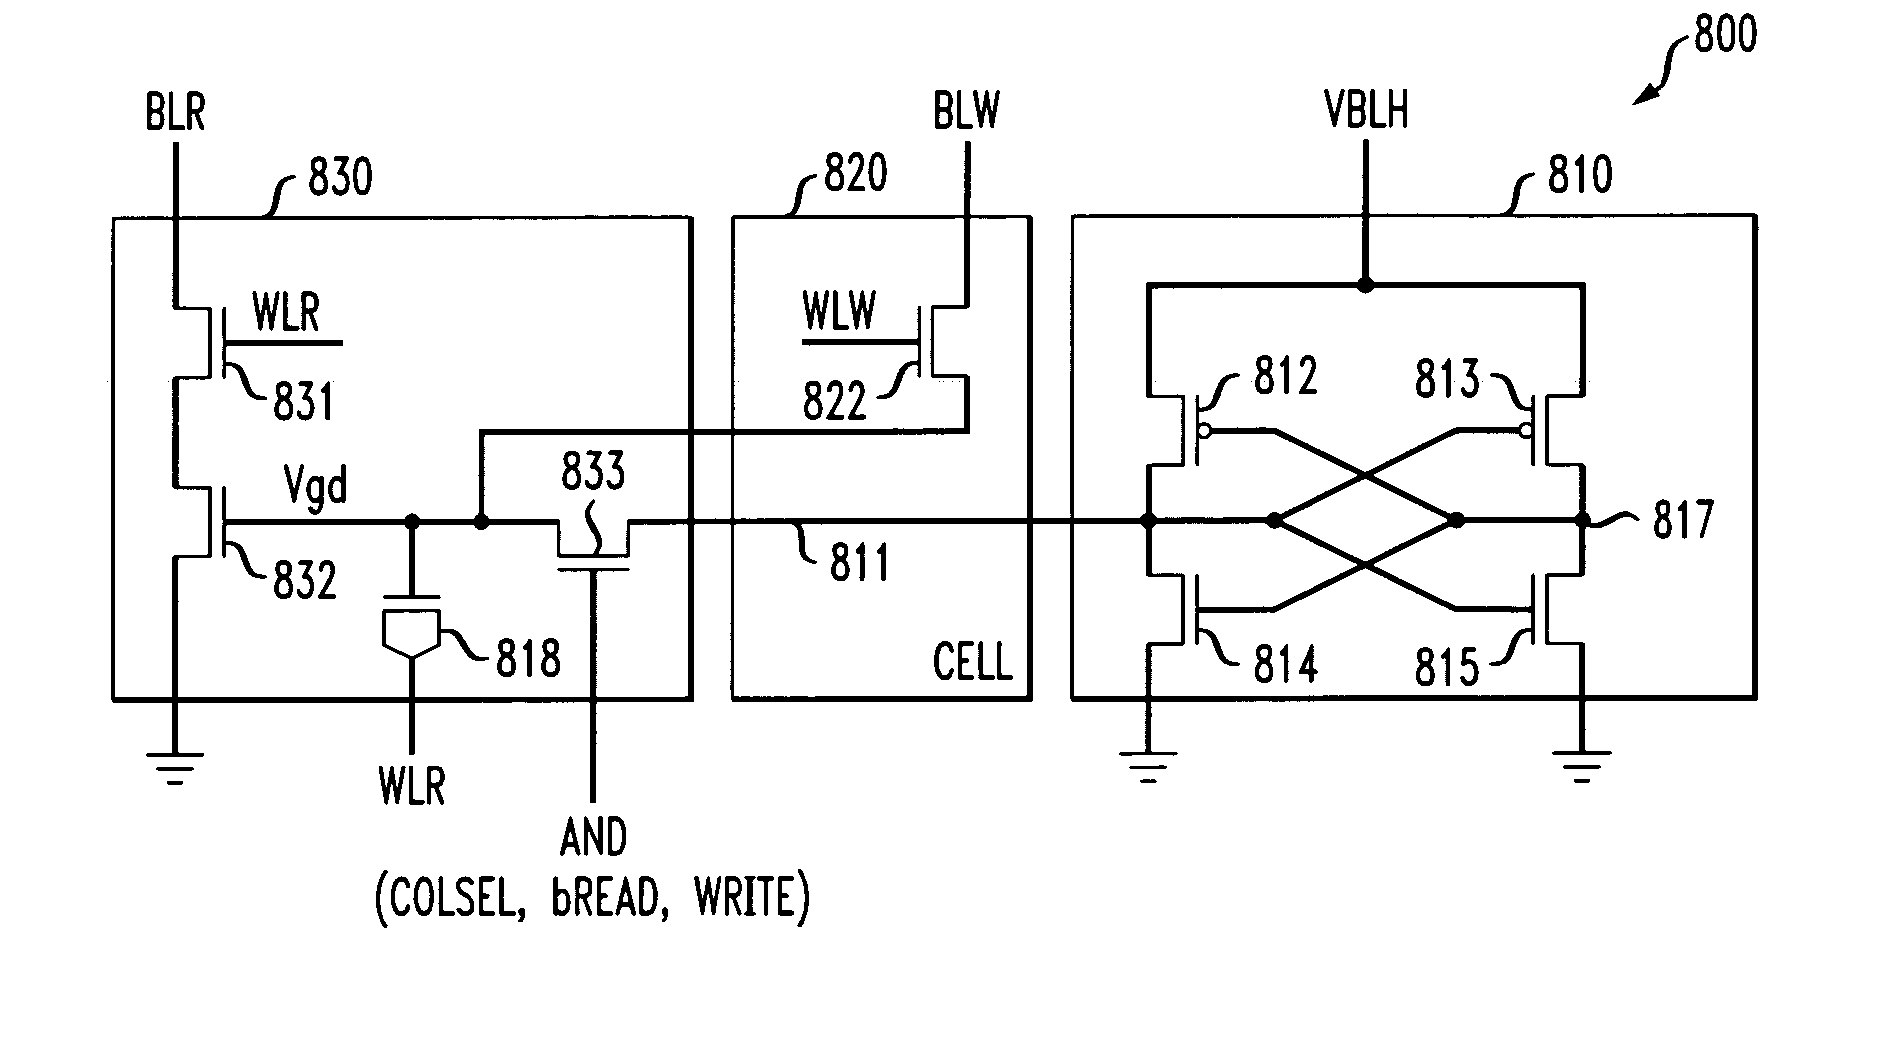 Static random access memory utilizing gated diode technology